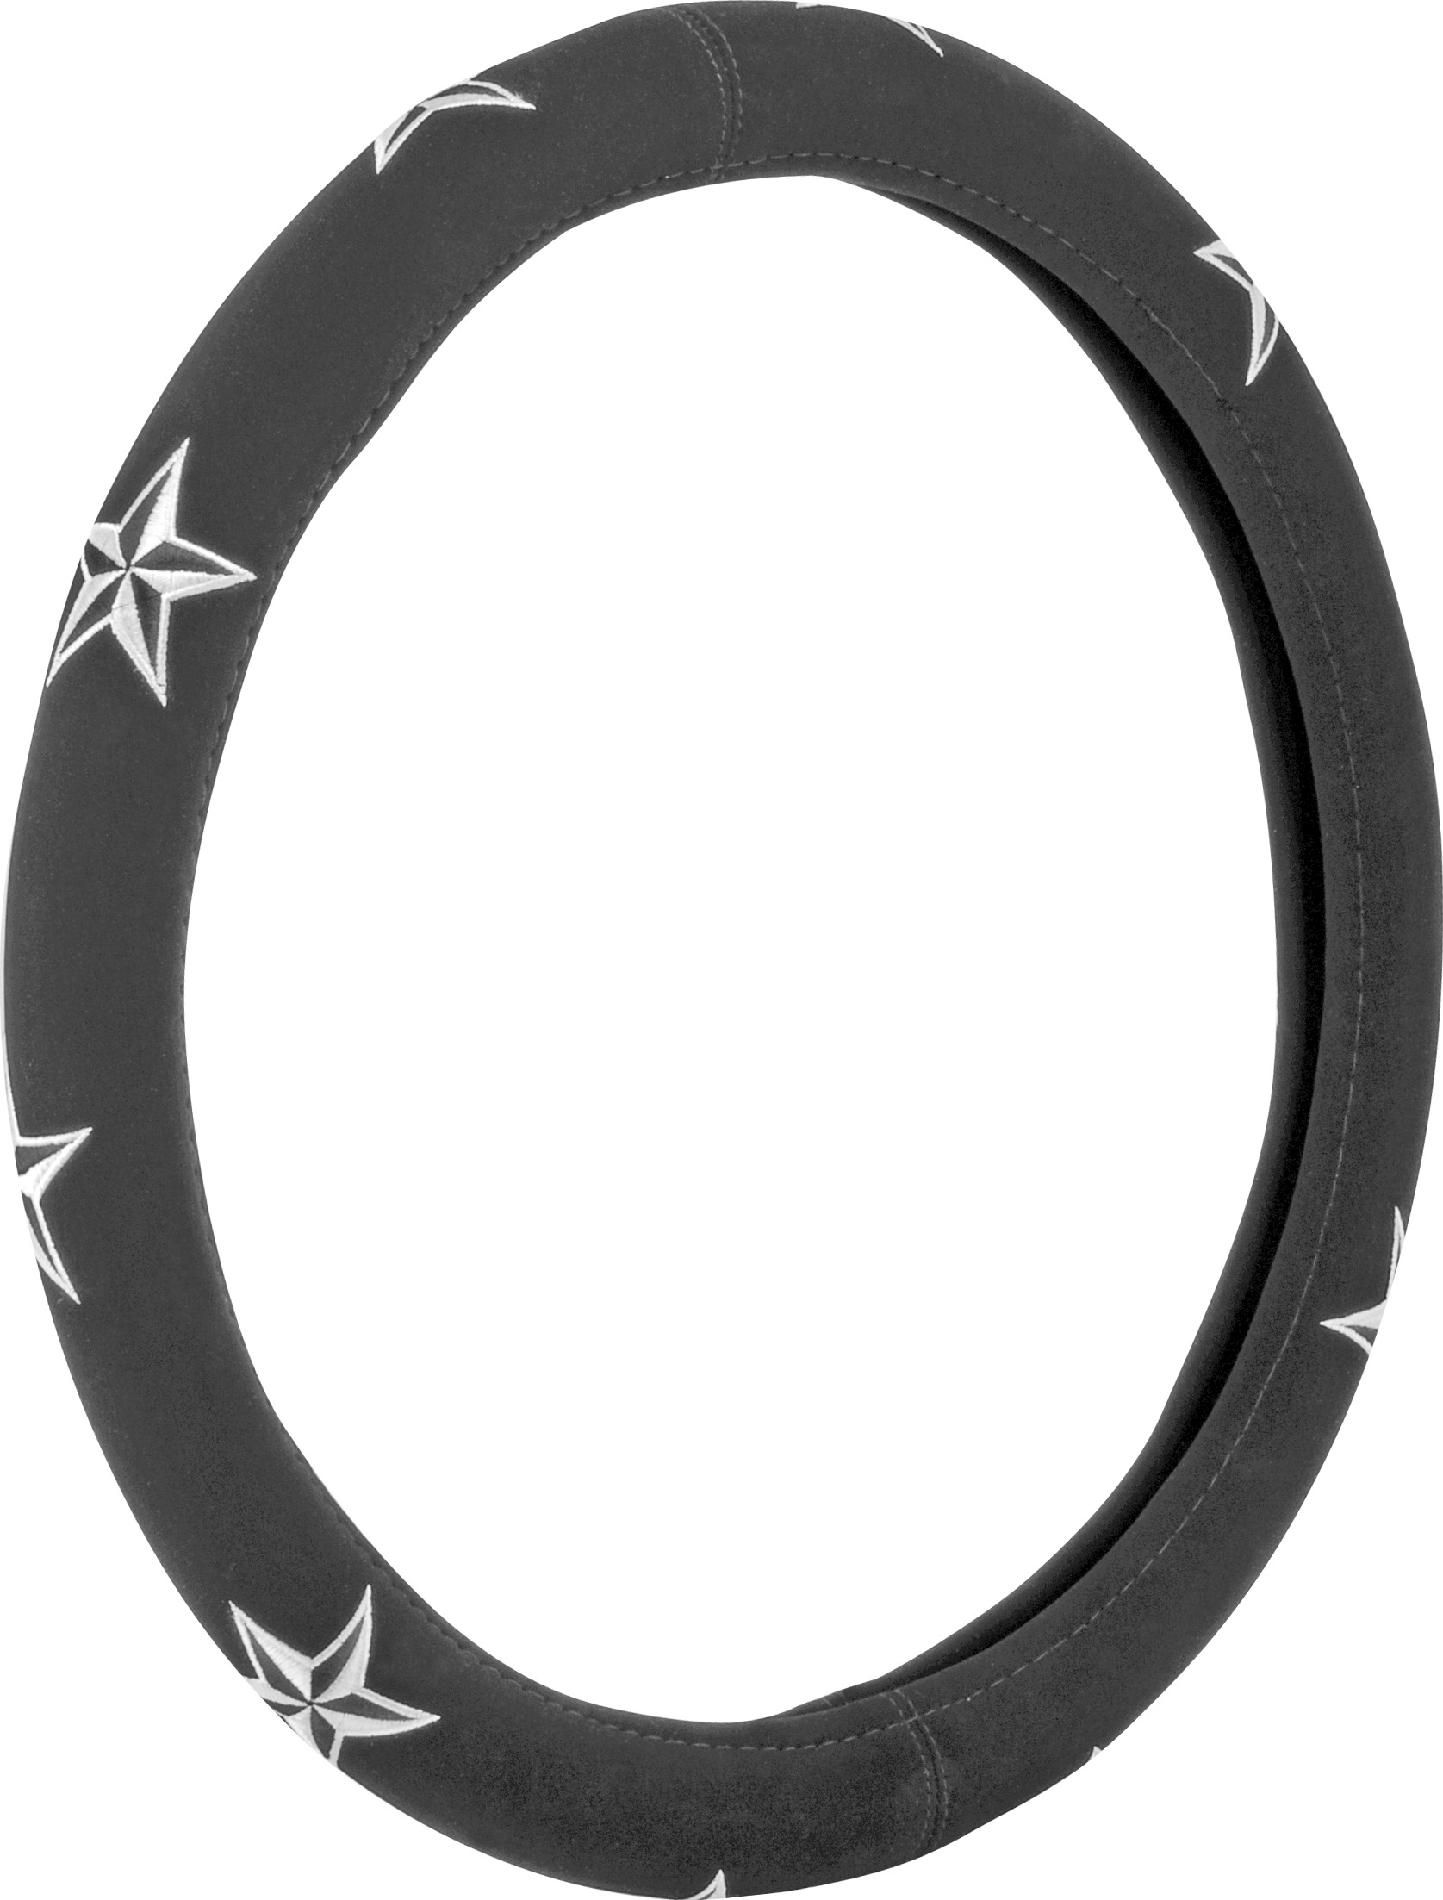 Bell Automotive Steering Wheel Cover - Nautical Star